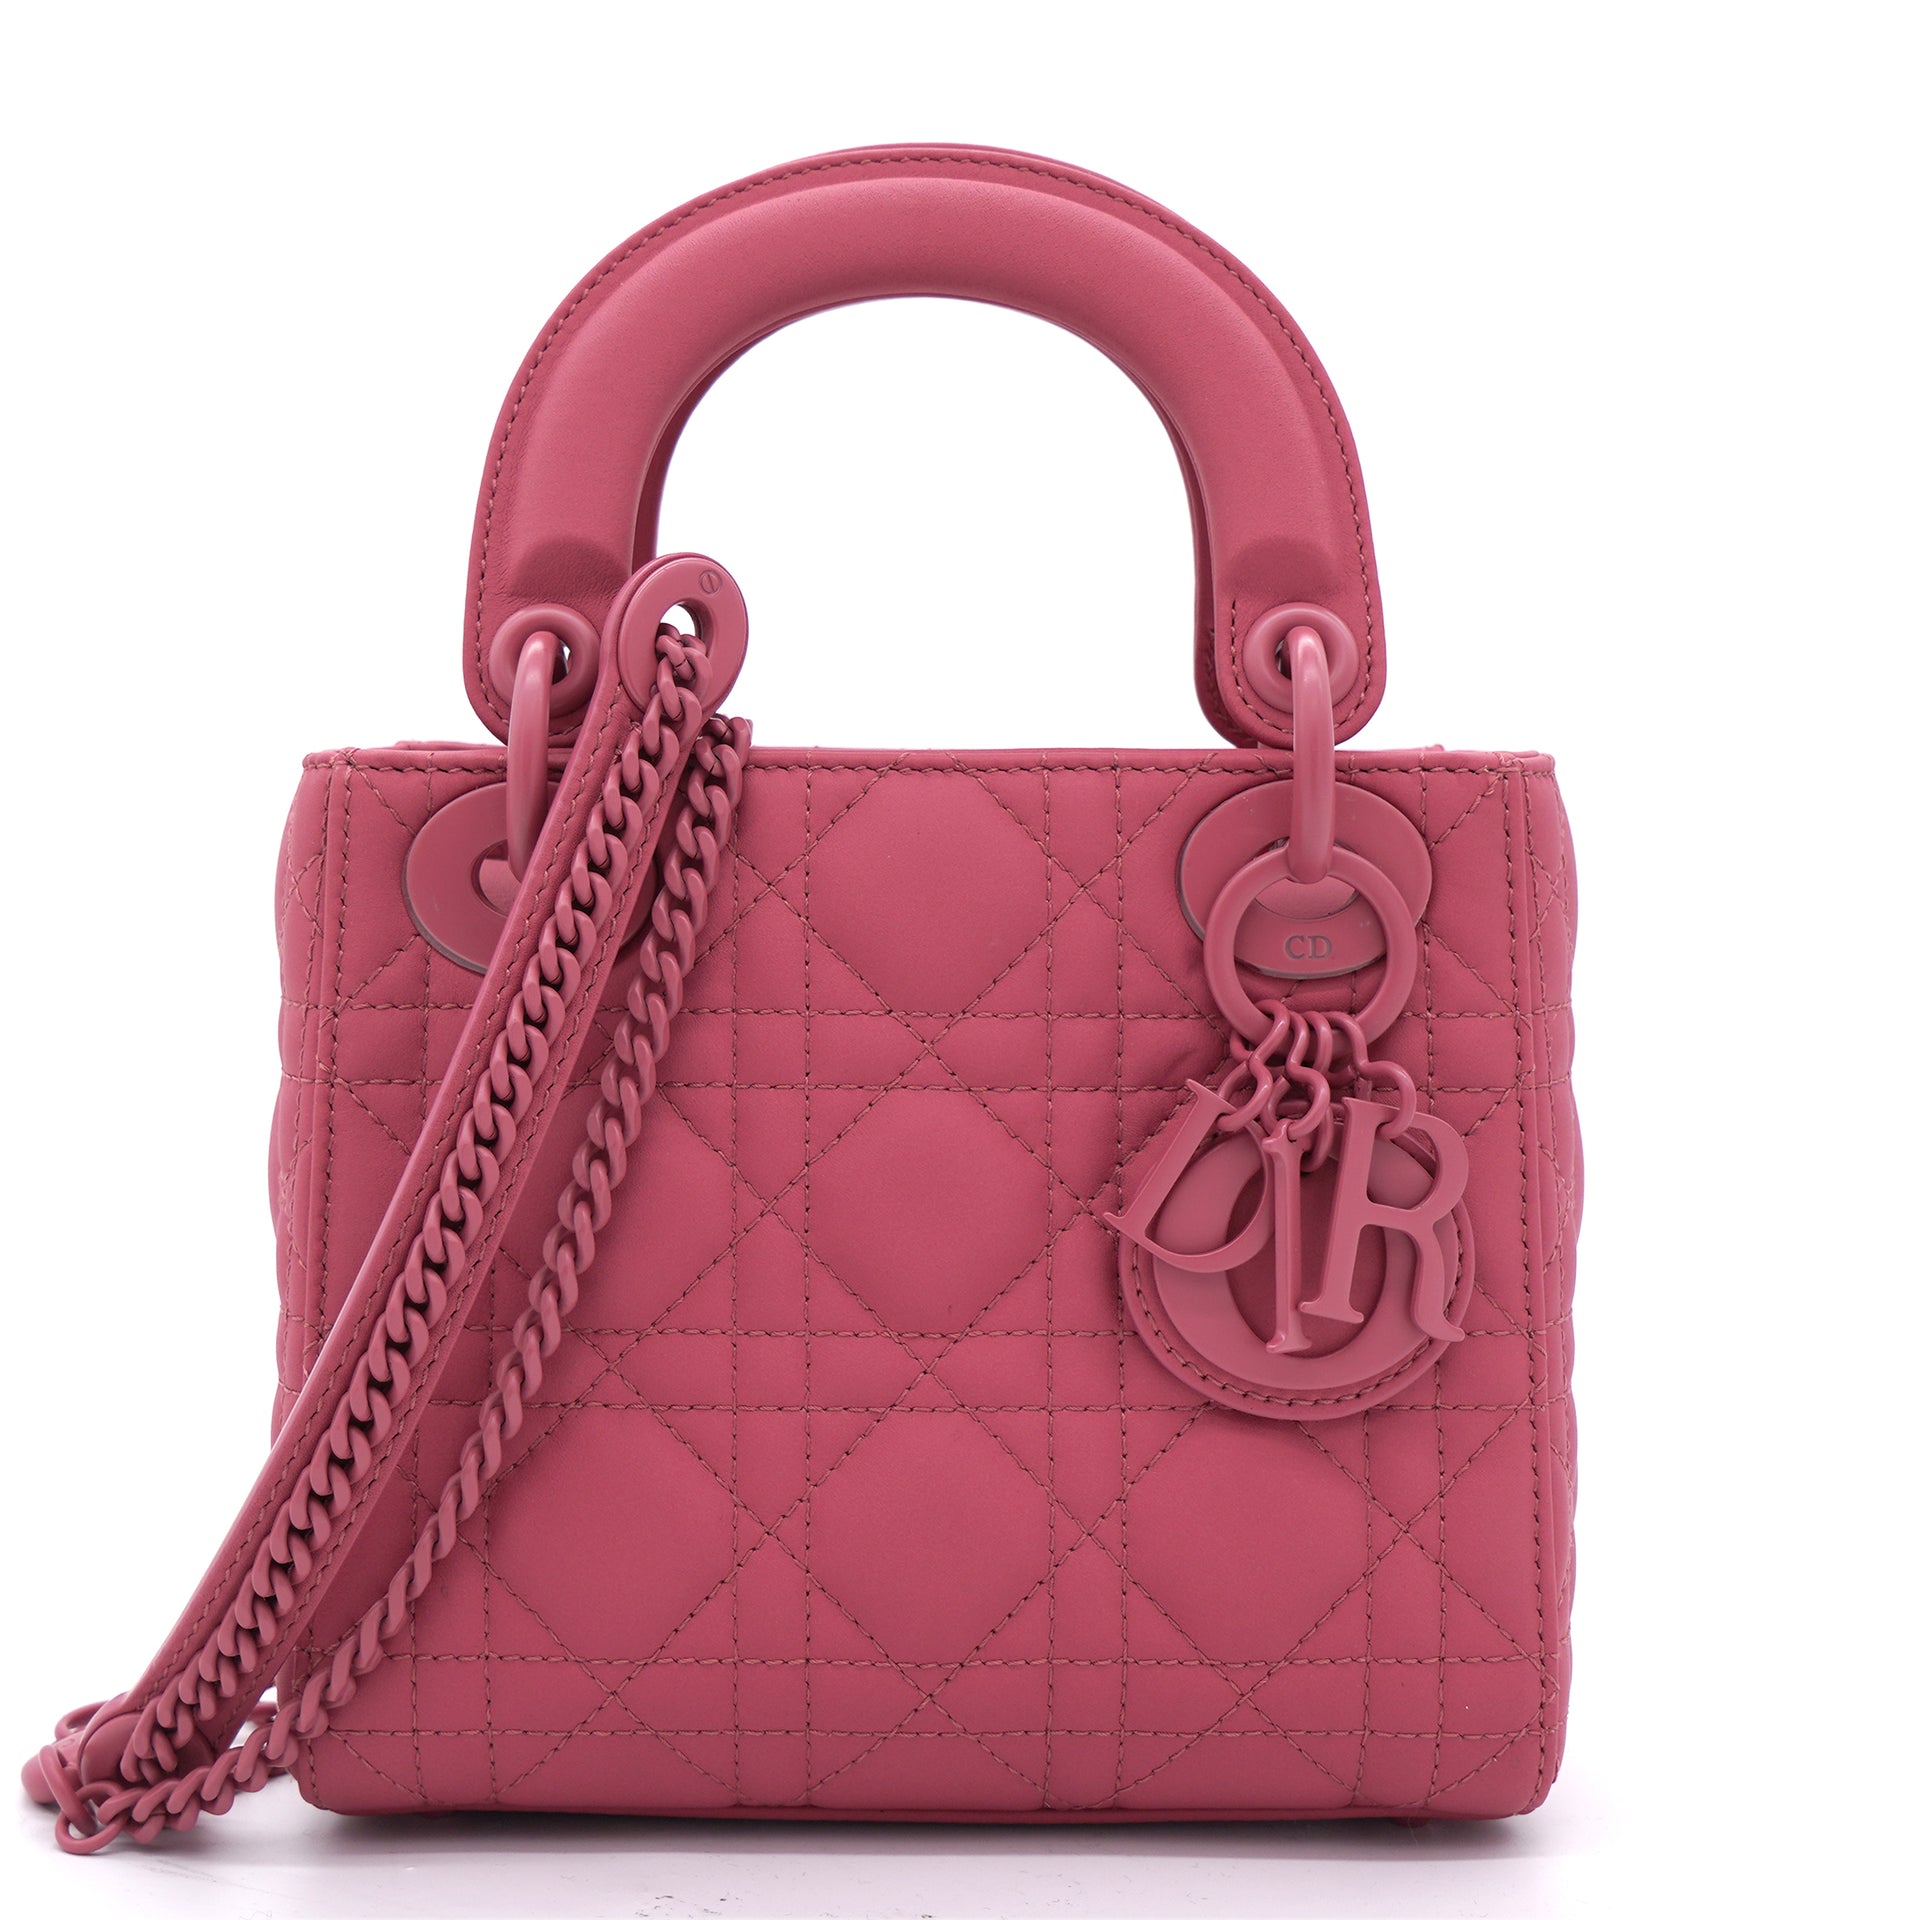 Lady dior leather handbag Dior Pink in Leather  15470263